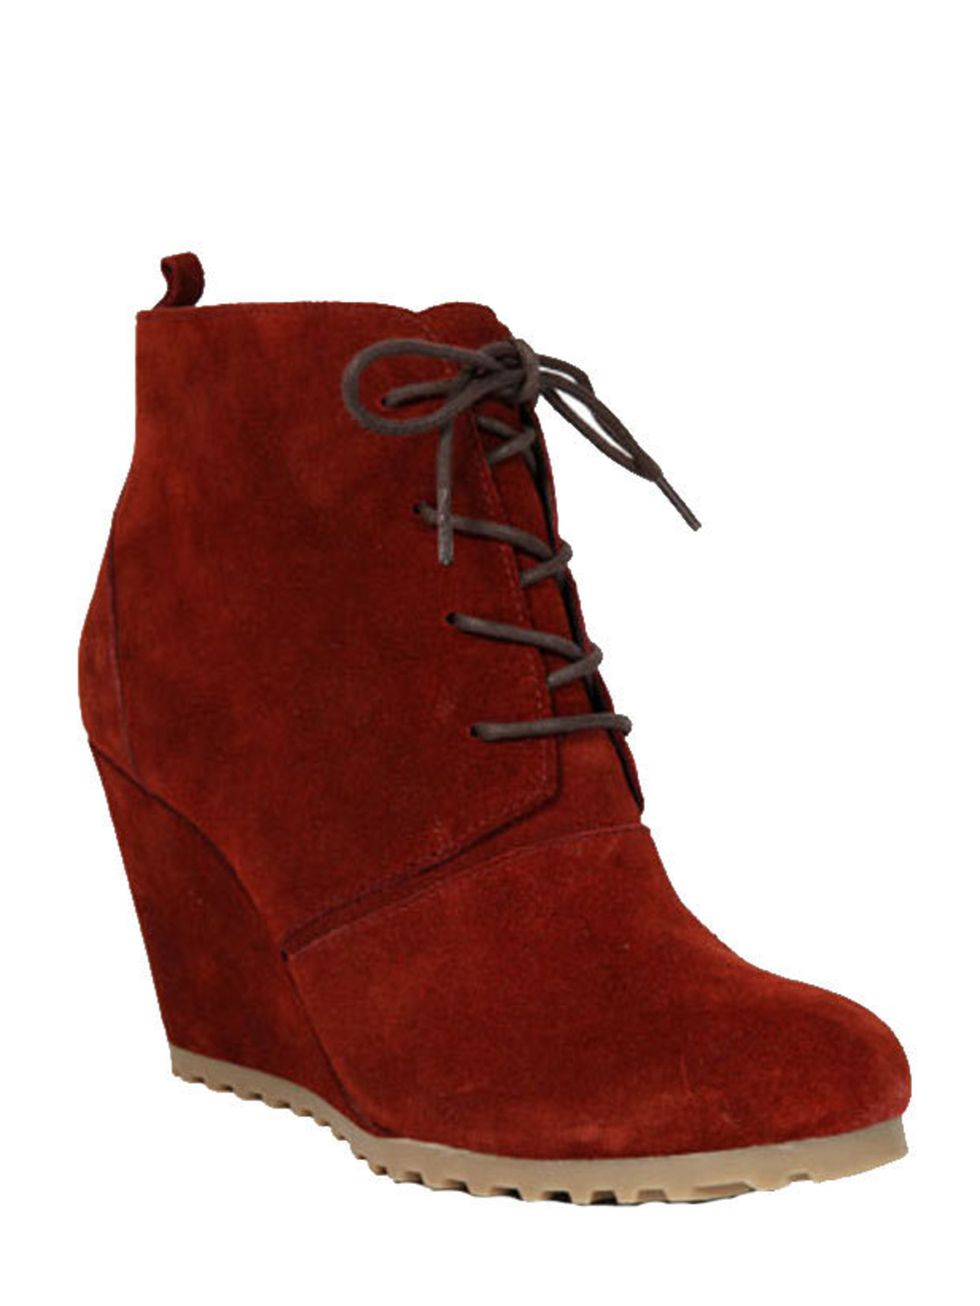 <p><a href="http://www.urbanoutfitters.co.uk/lace-up-tread-rust-boots/invt/5318471328865/&amp;bklist=icat,5,shop,womens,shoes,wboots">Urban Outfitters</a> lace-up tread boots, £85</p>